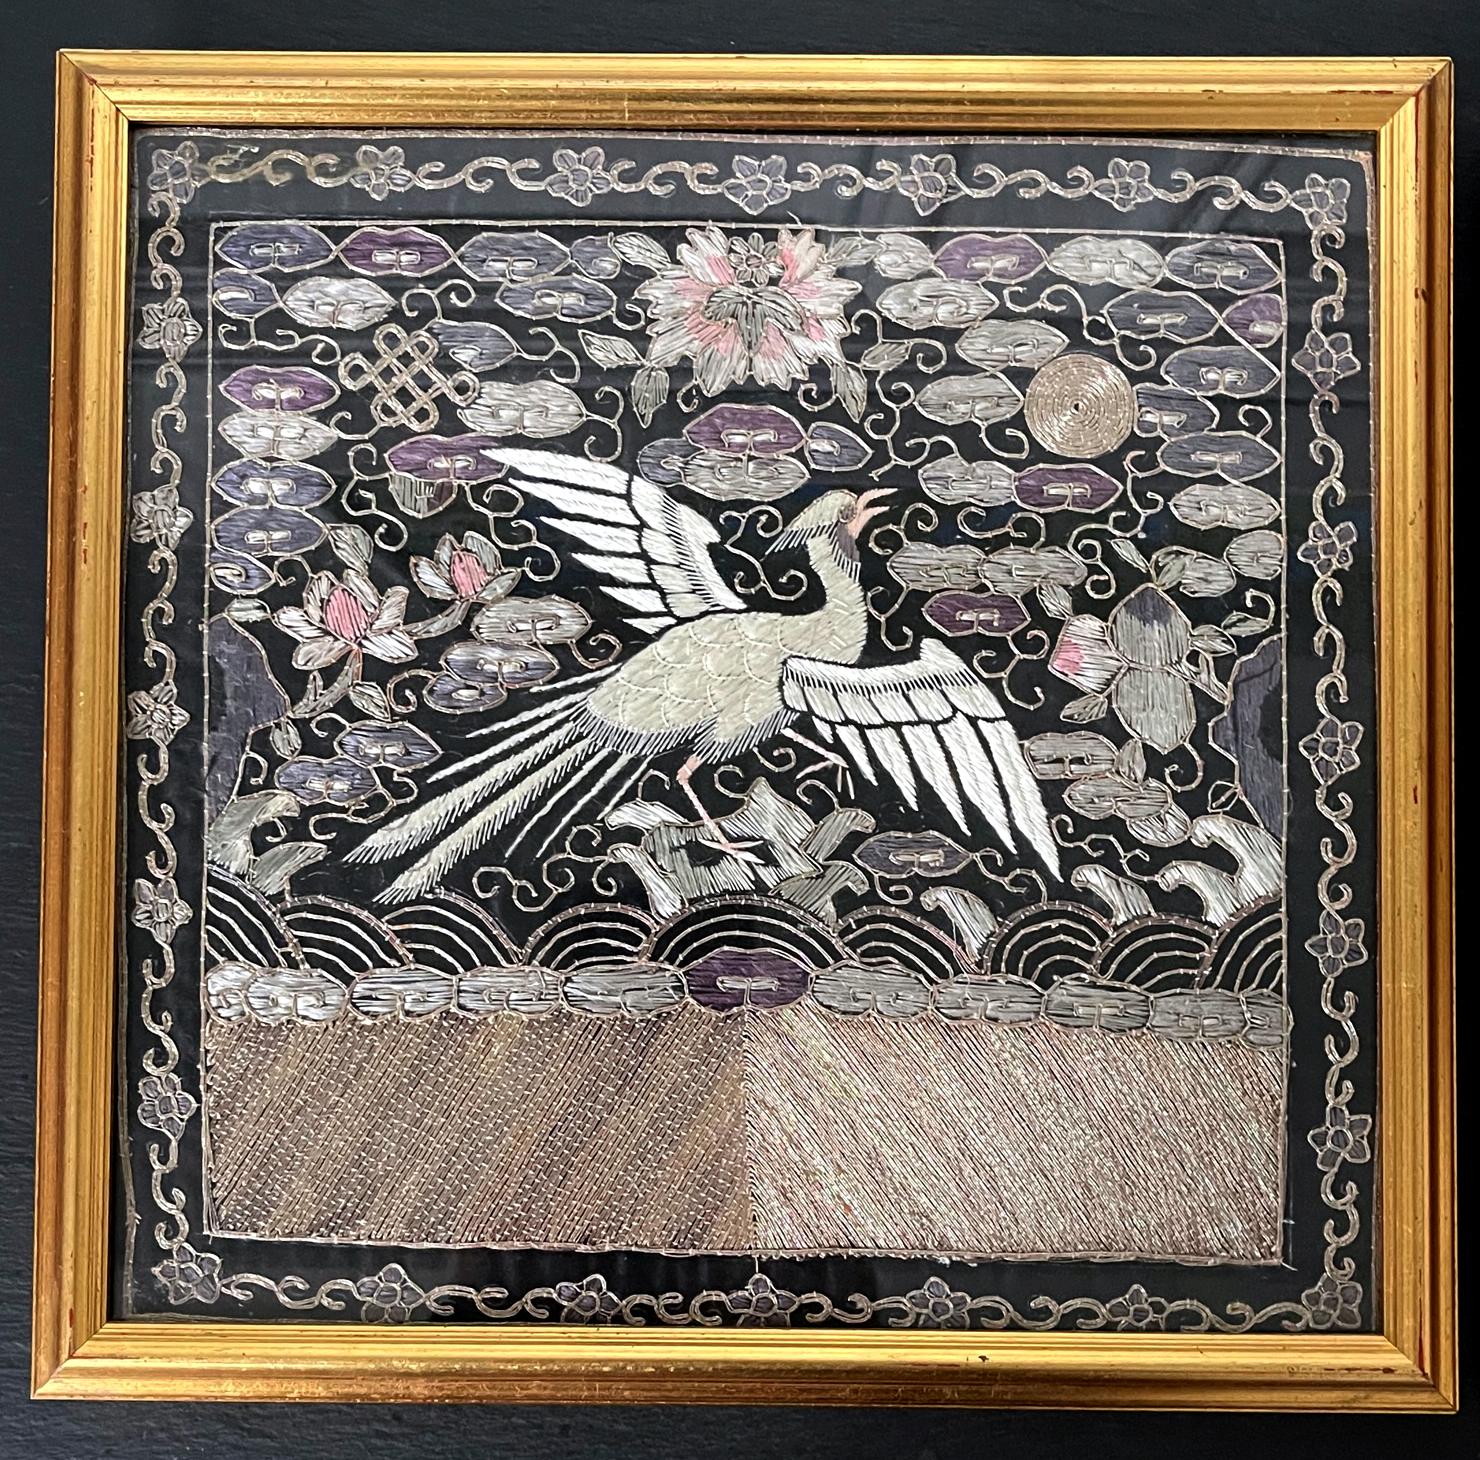 On offer is a matching pair of embroidered silk civil rank badge panels (known in Chinese as Buzi) in black lacquer frames. The panels feature a black background within a scrolling floral border. In the center, it showcases a winged paradise fly